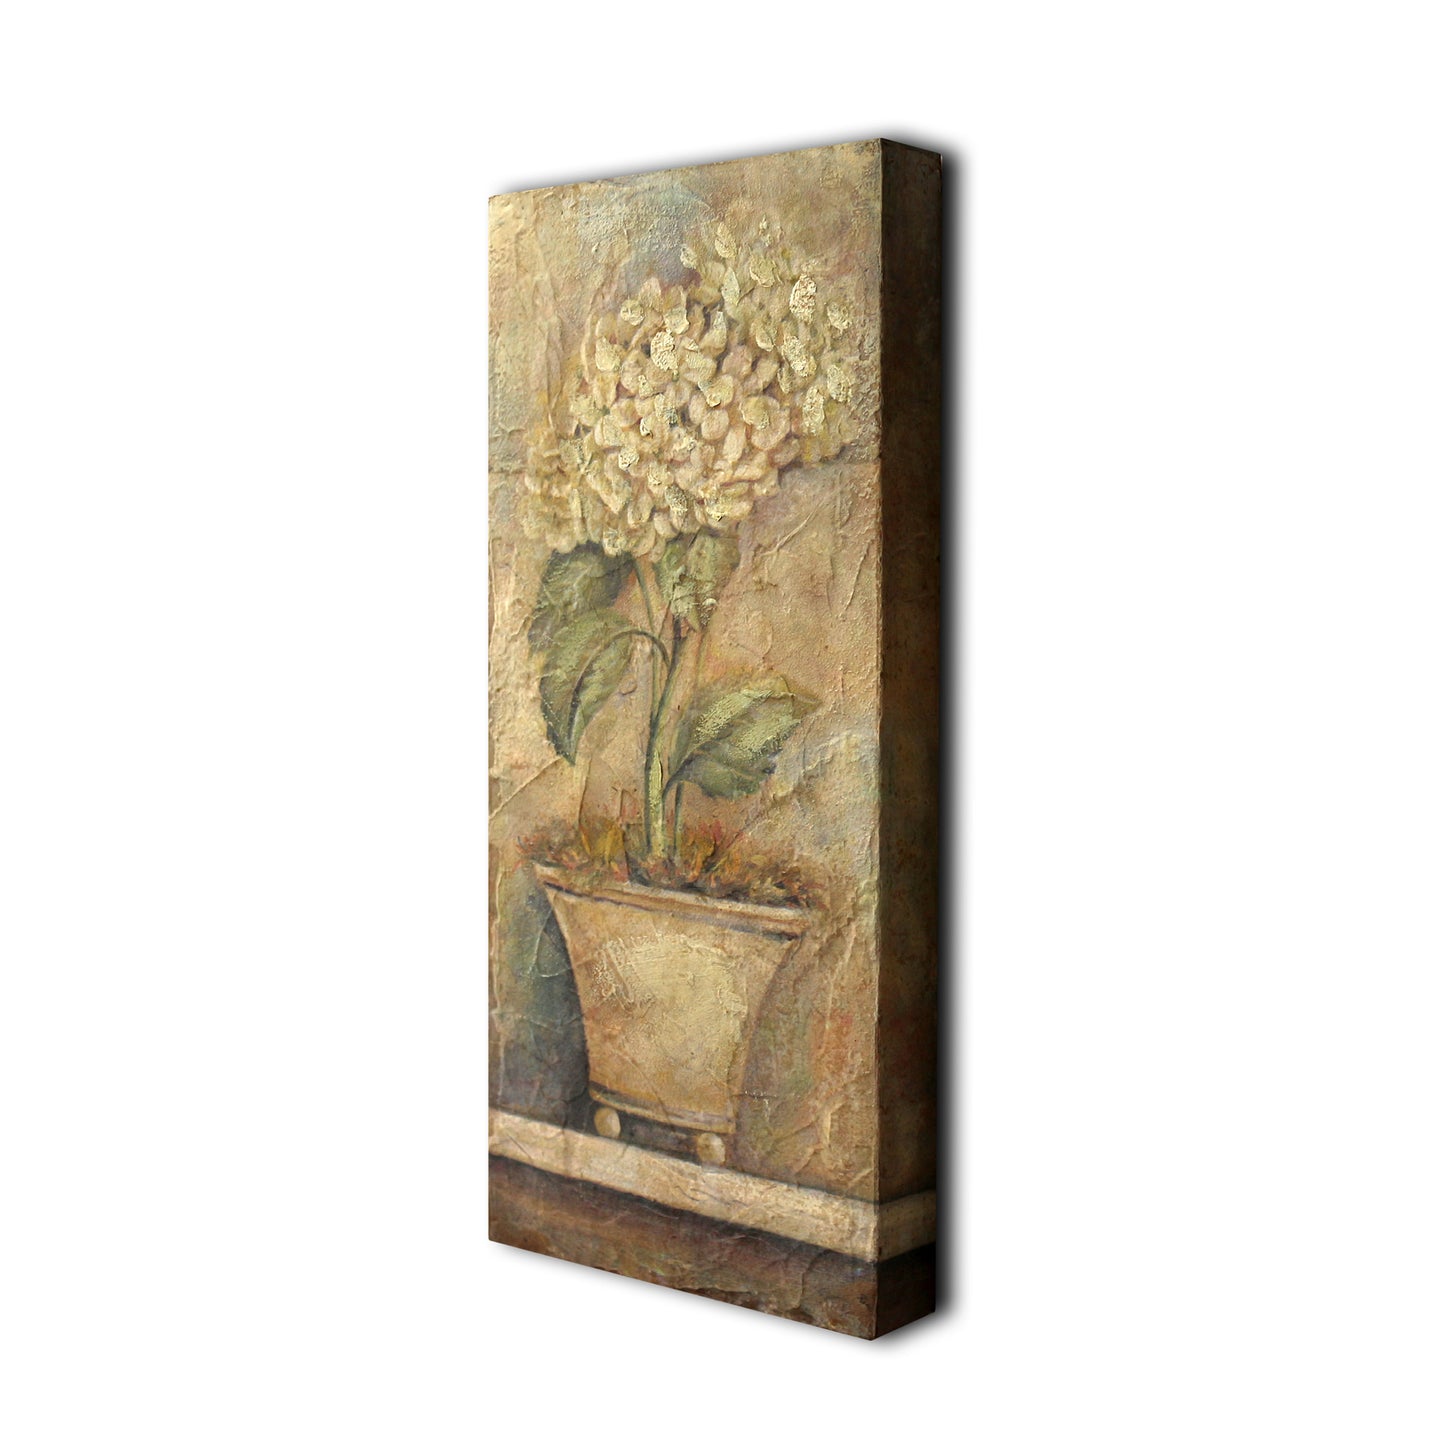 CVHOMEDECO. Rustic Vintage Hand Painted Wooden Frame Wall Hanging Abstract Art 3d Oil Painting Decoration Art, Flower in Planter Design, 6 x 13 Inch